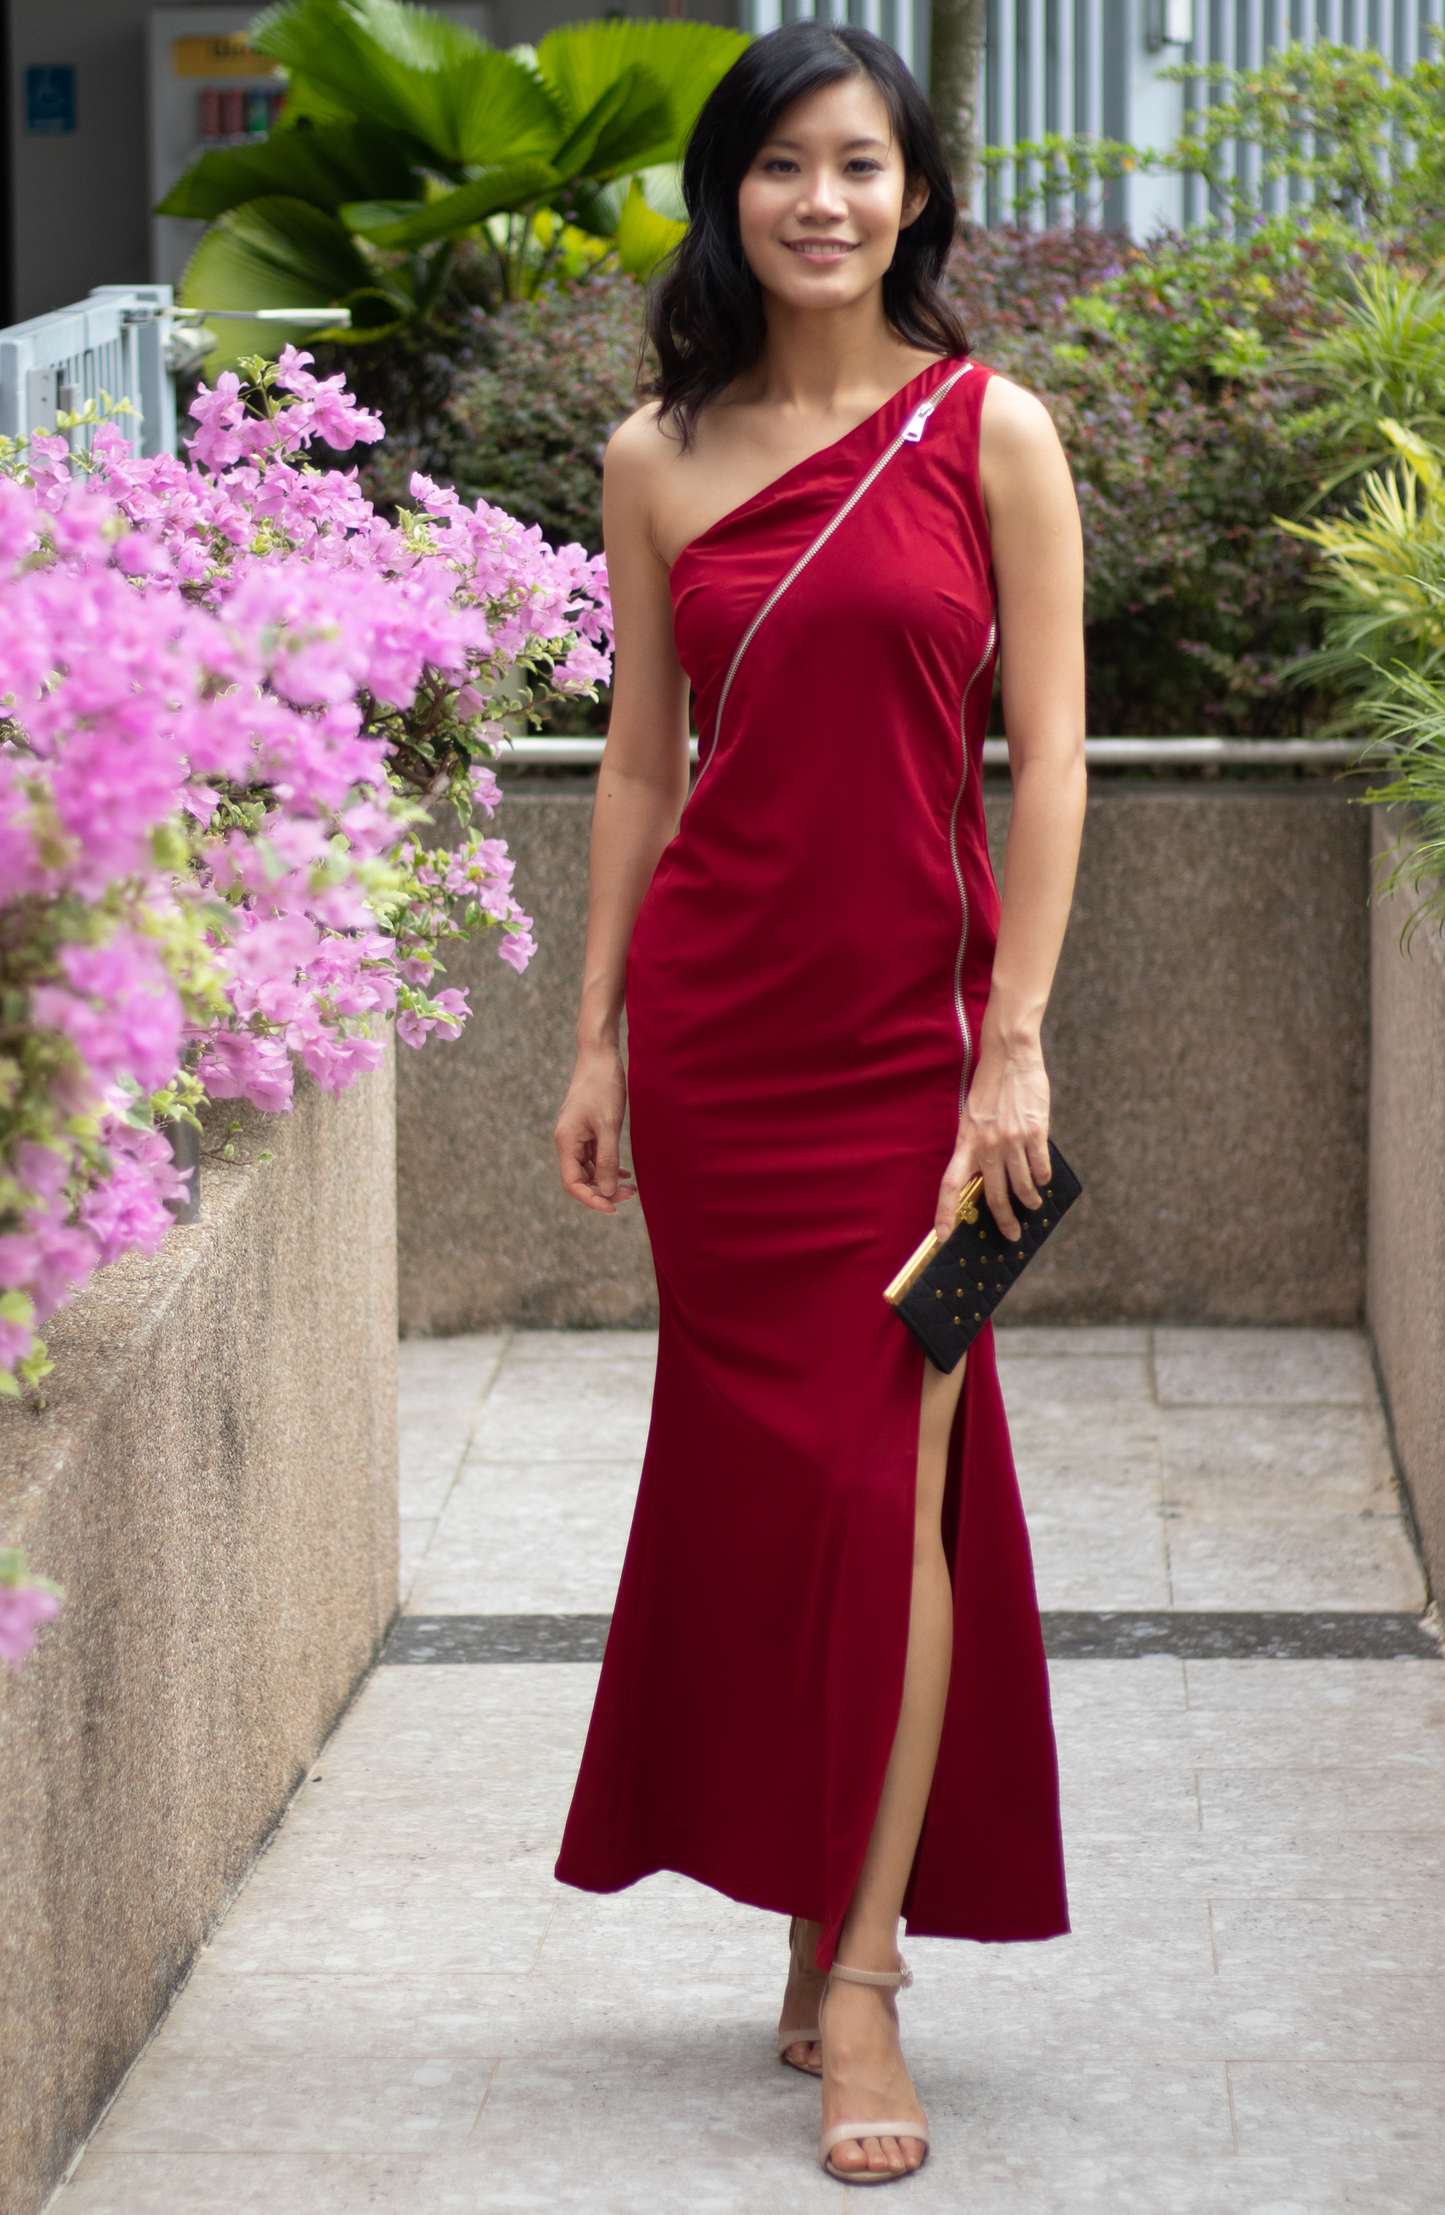 Adjustable Zip Ruby Red One Shoulder Casual Evening Maxi Dress Gown